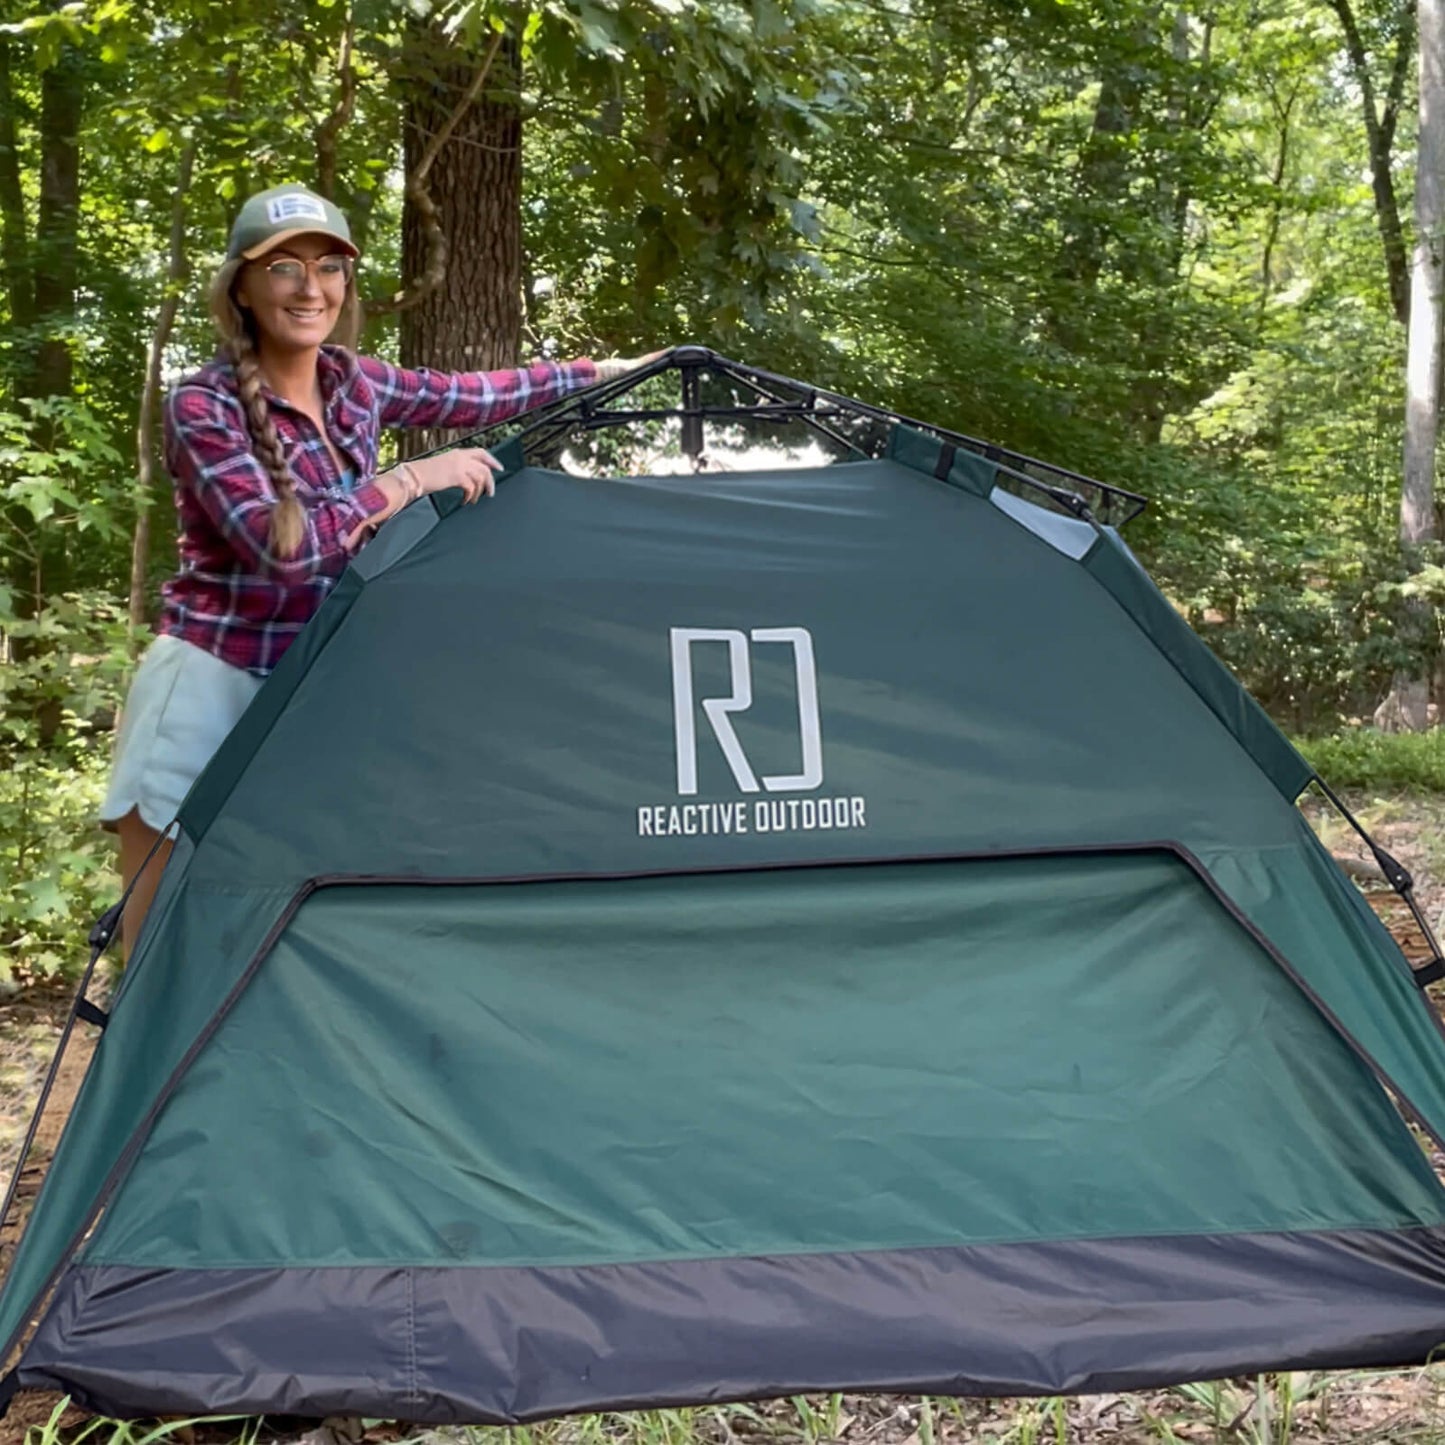 Large-Sized 3 Secs Tent (For 2-3 Person, IE)